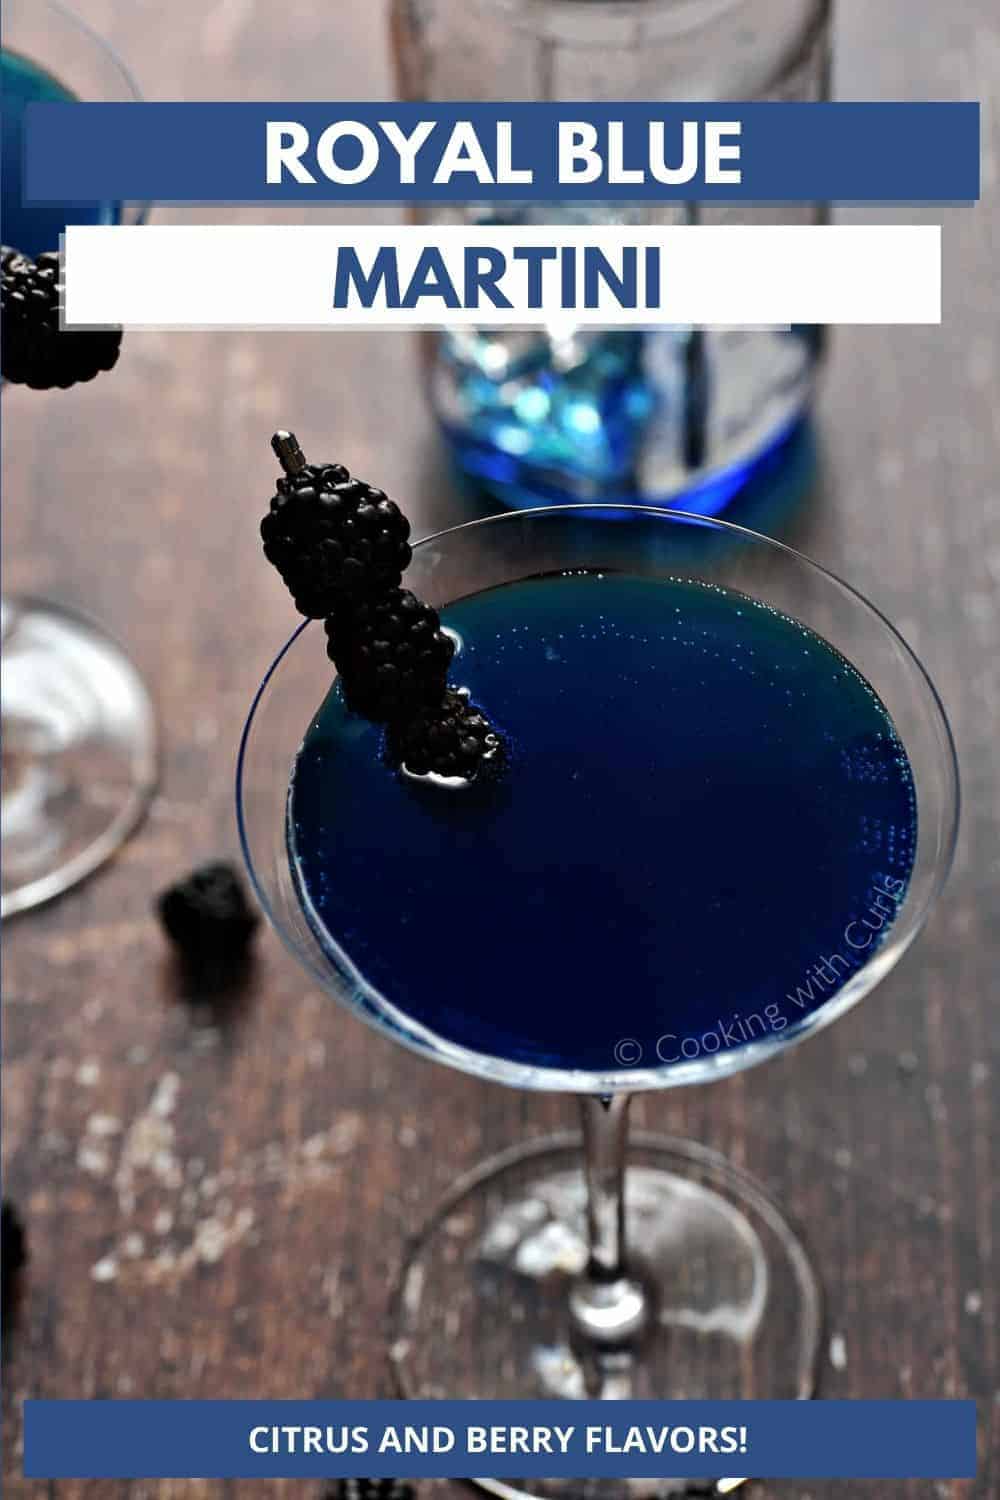 Royal Blue Martini garnished with three blackberries and title graphic across the top.